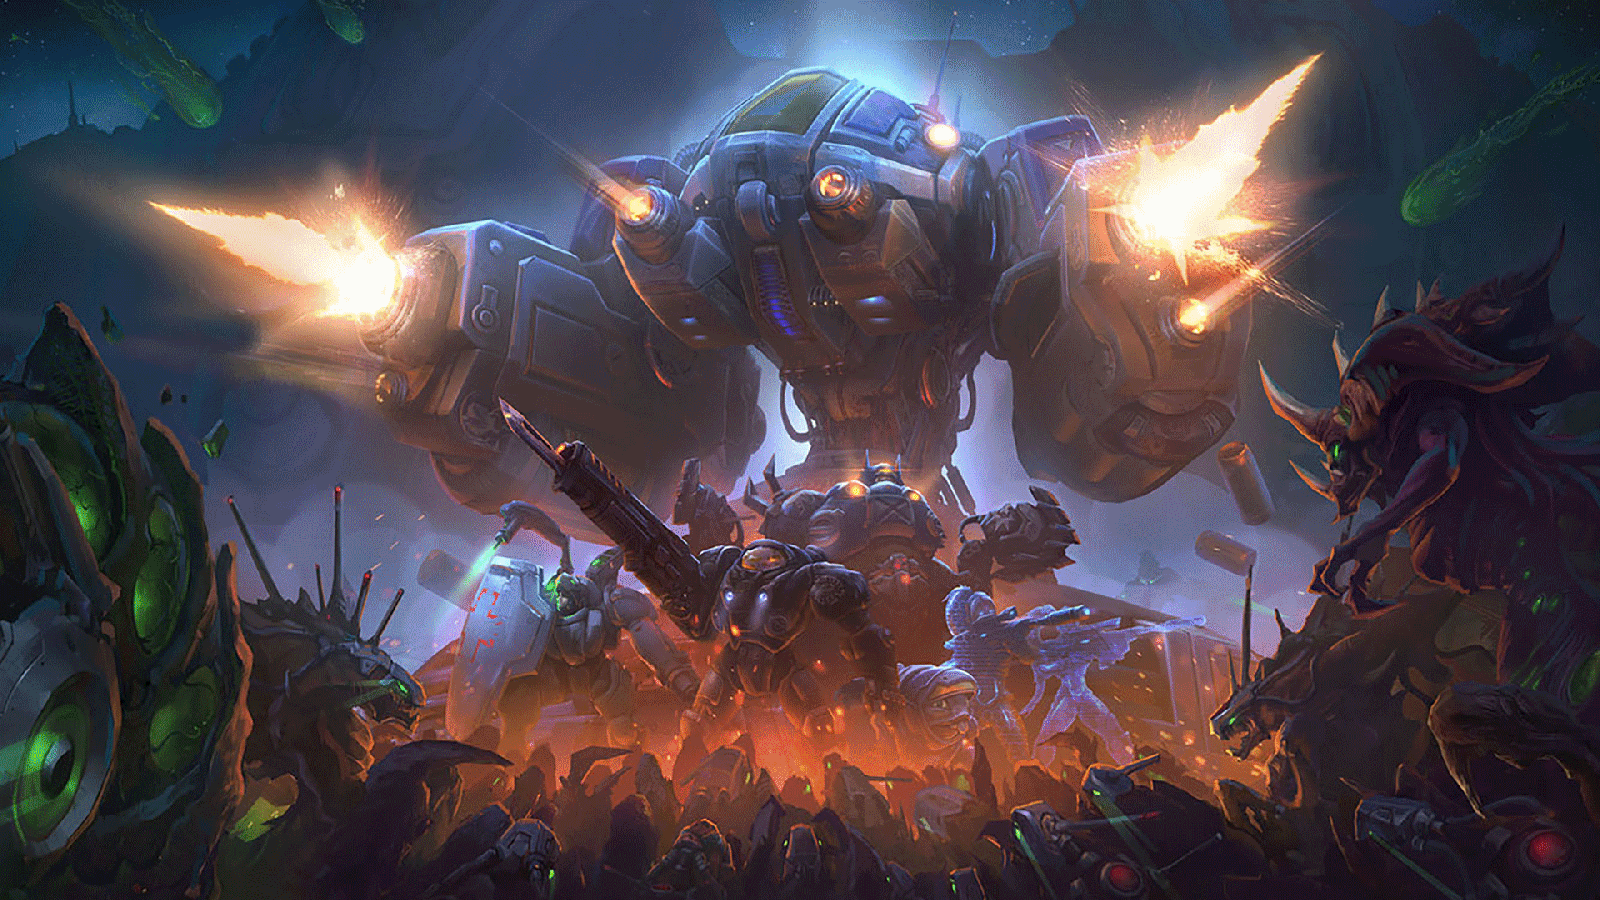 The Art Of Blizzard’s Heroes Of The Storm